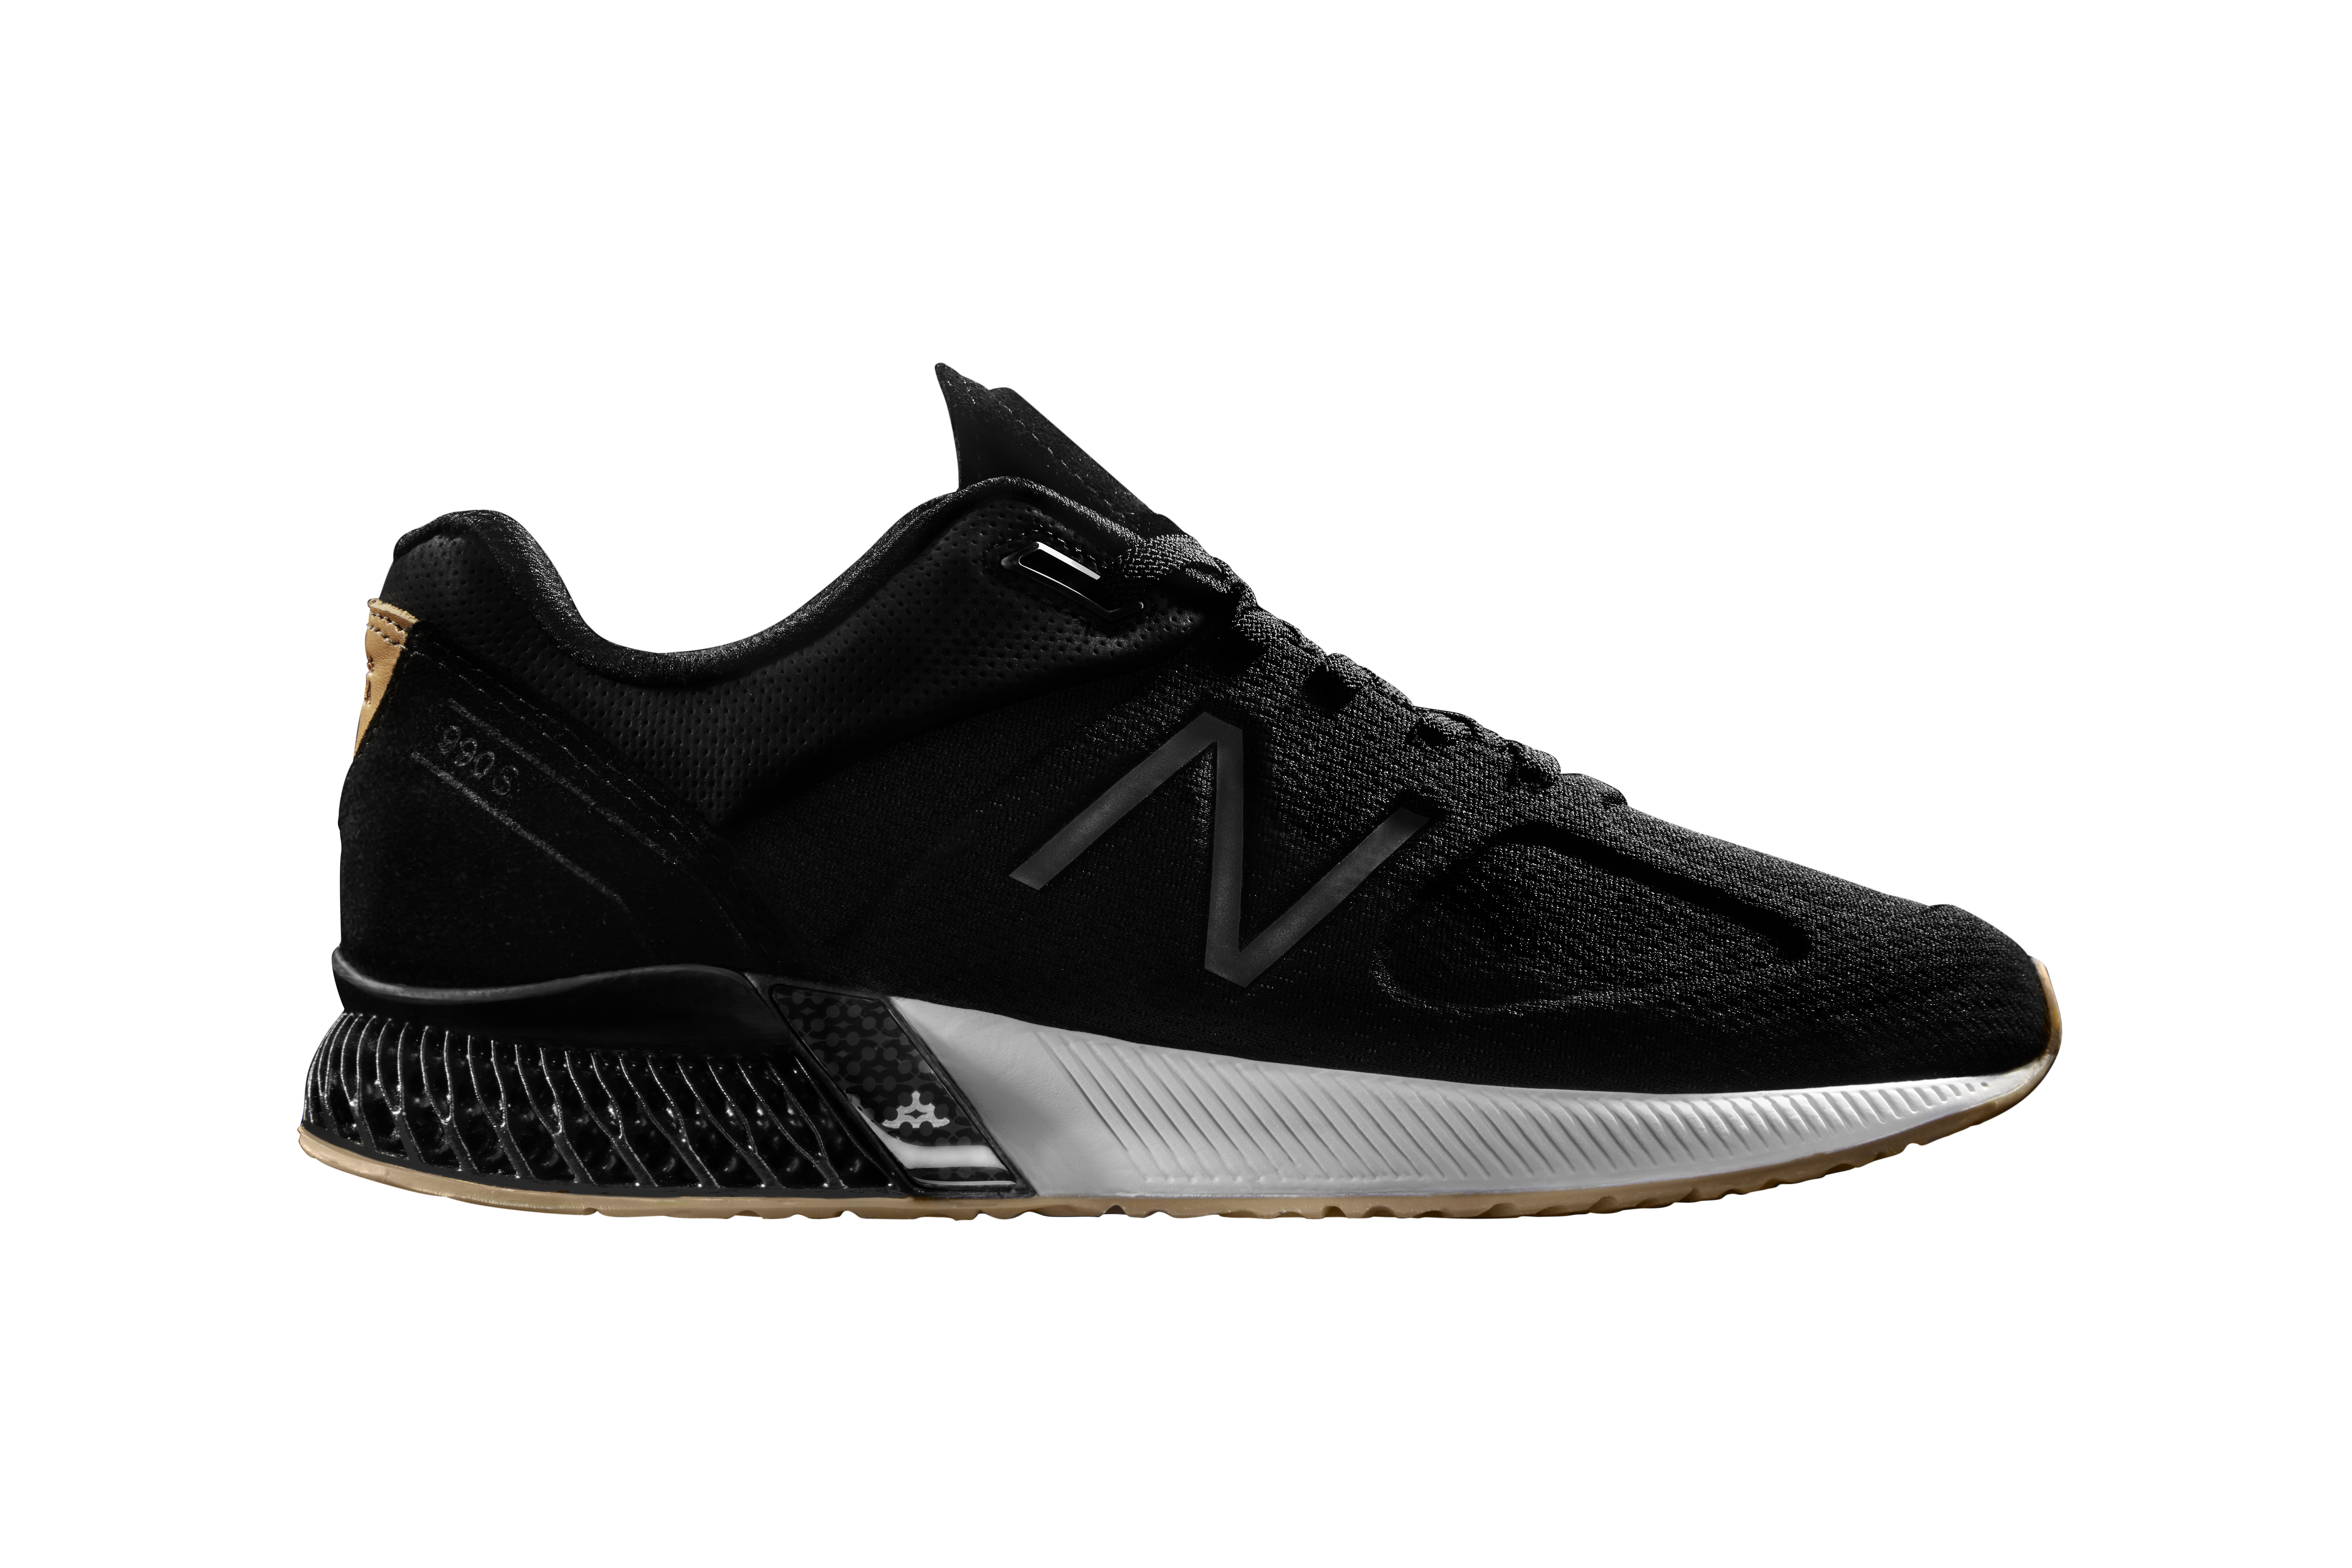 Formlabs is 3D printing parts of New Balance's new sneakers ...